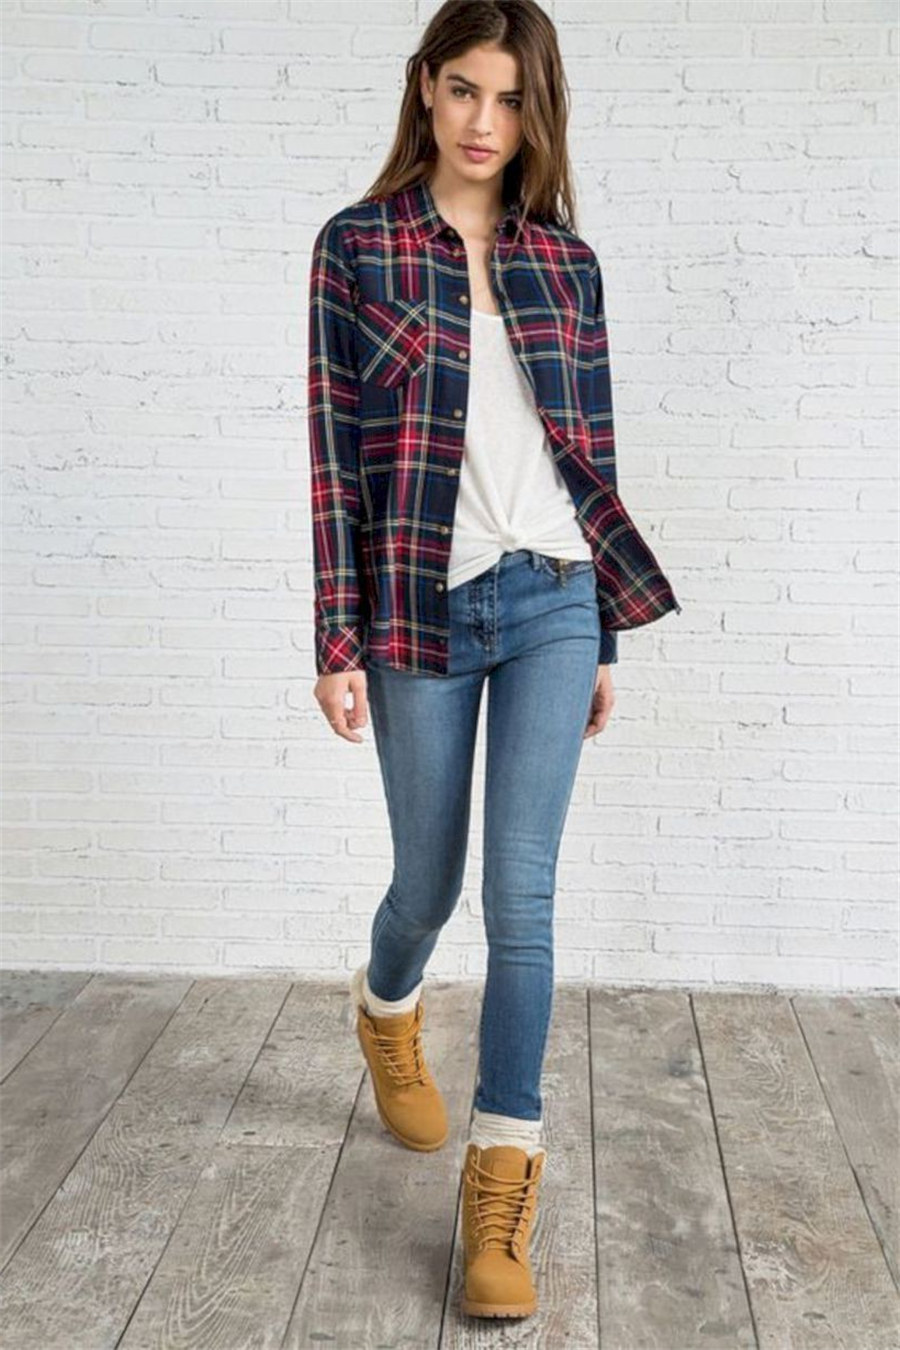 Timberlands boot outfit ideas 29